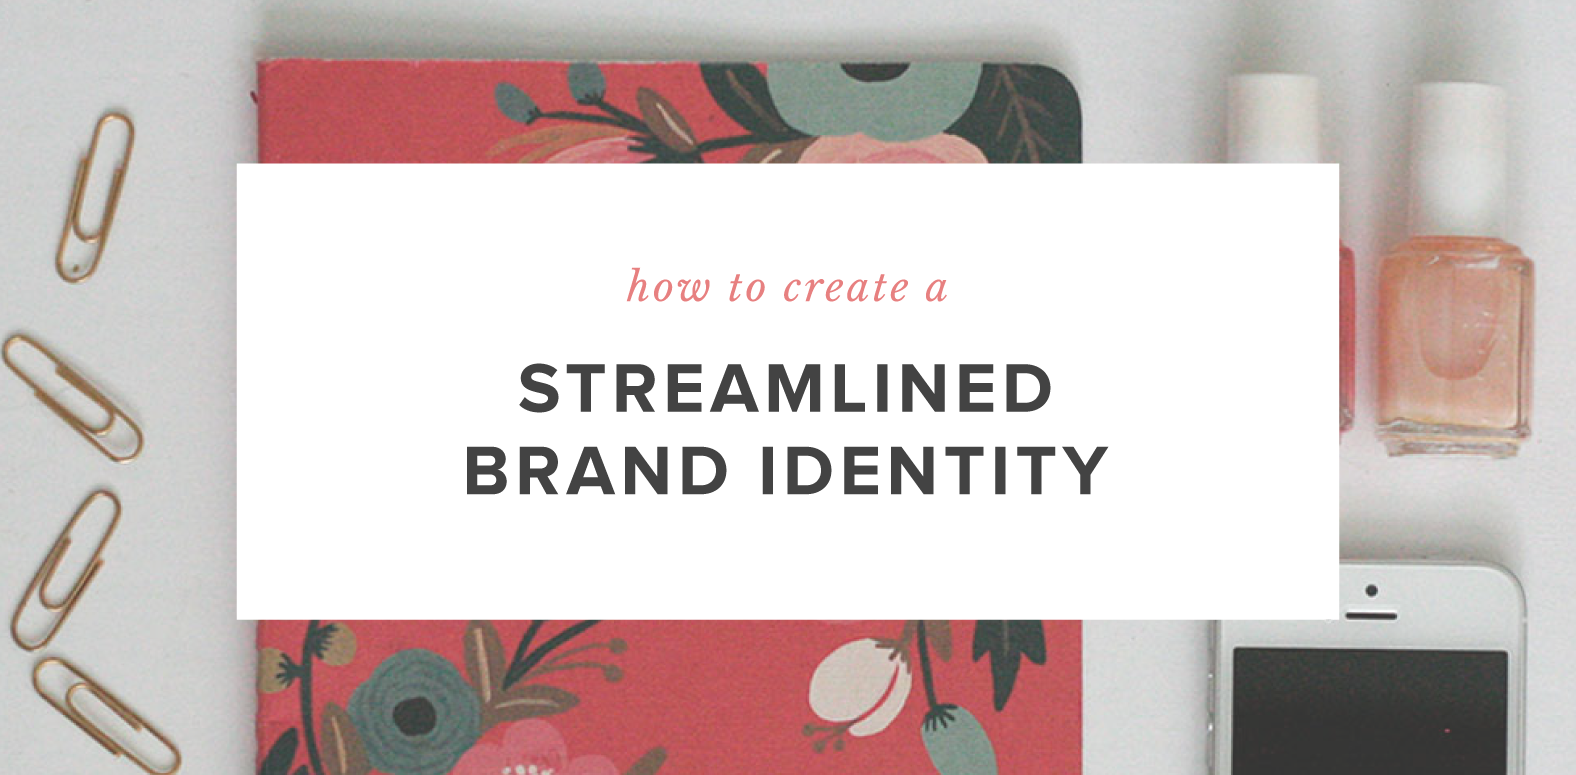 How to Create a Streamlined Brand Identity